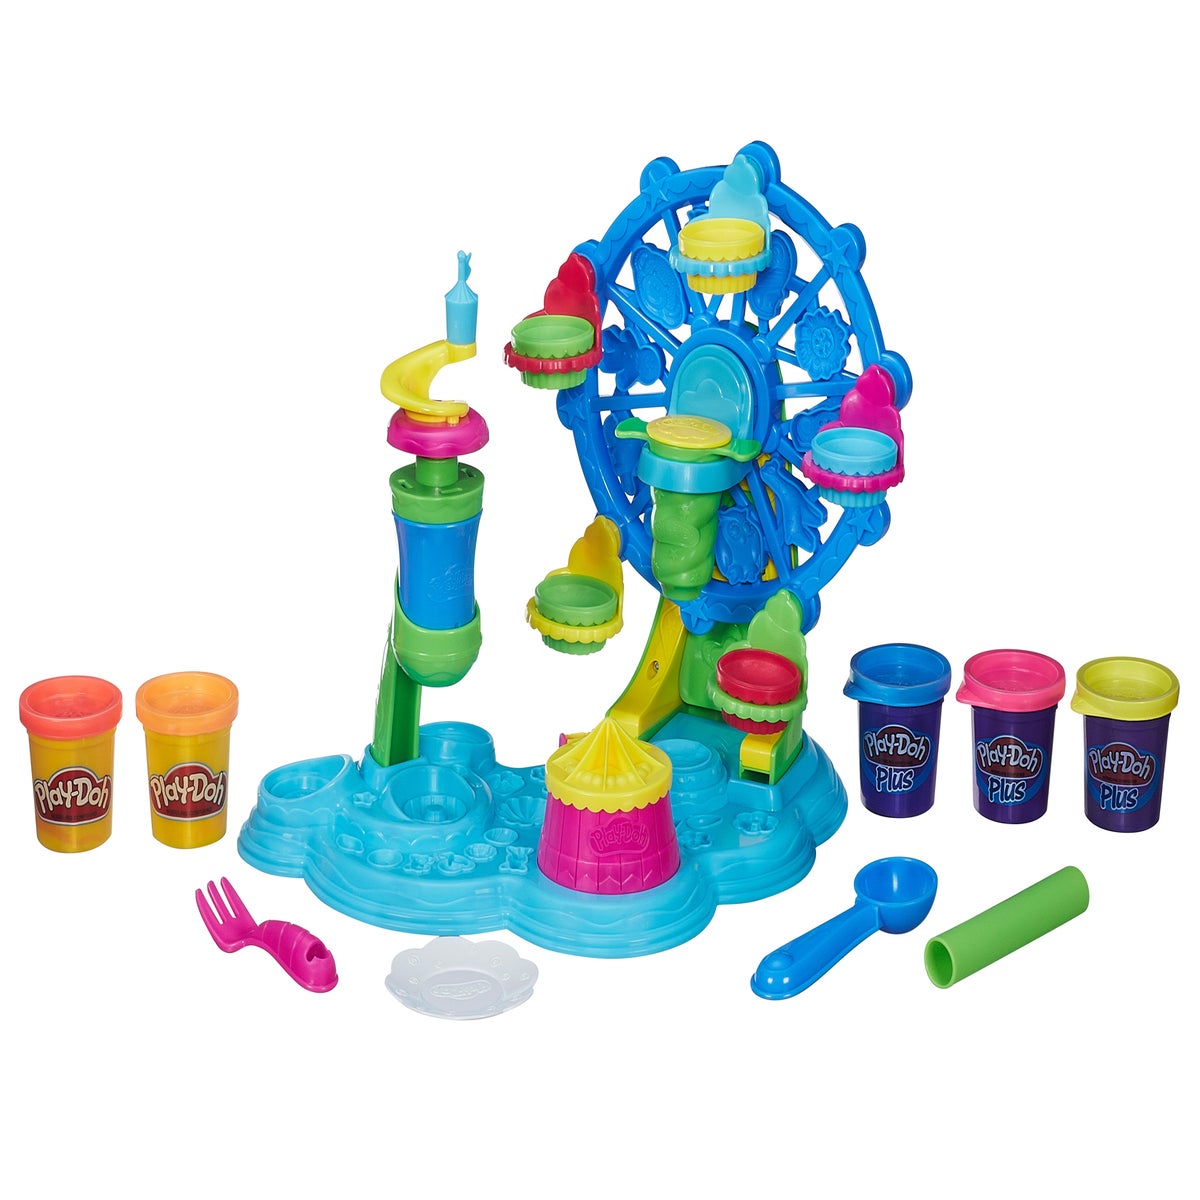 https://static.independent.co.uk/s3fs-public/thumbnails/image/2015/11/12/12/Play-Doh-1.jpg?width=1200&height=1200&fit=crop